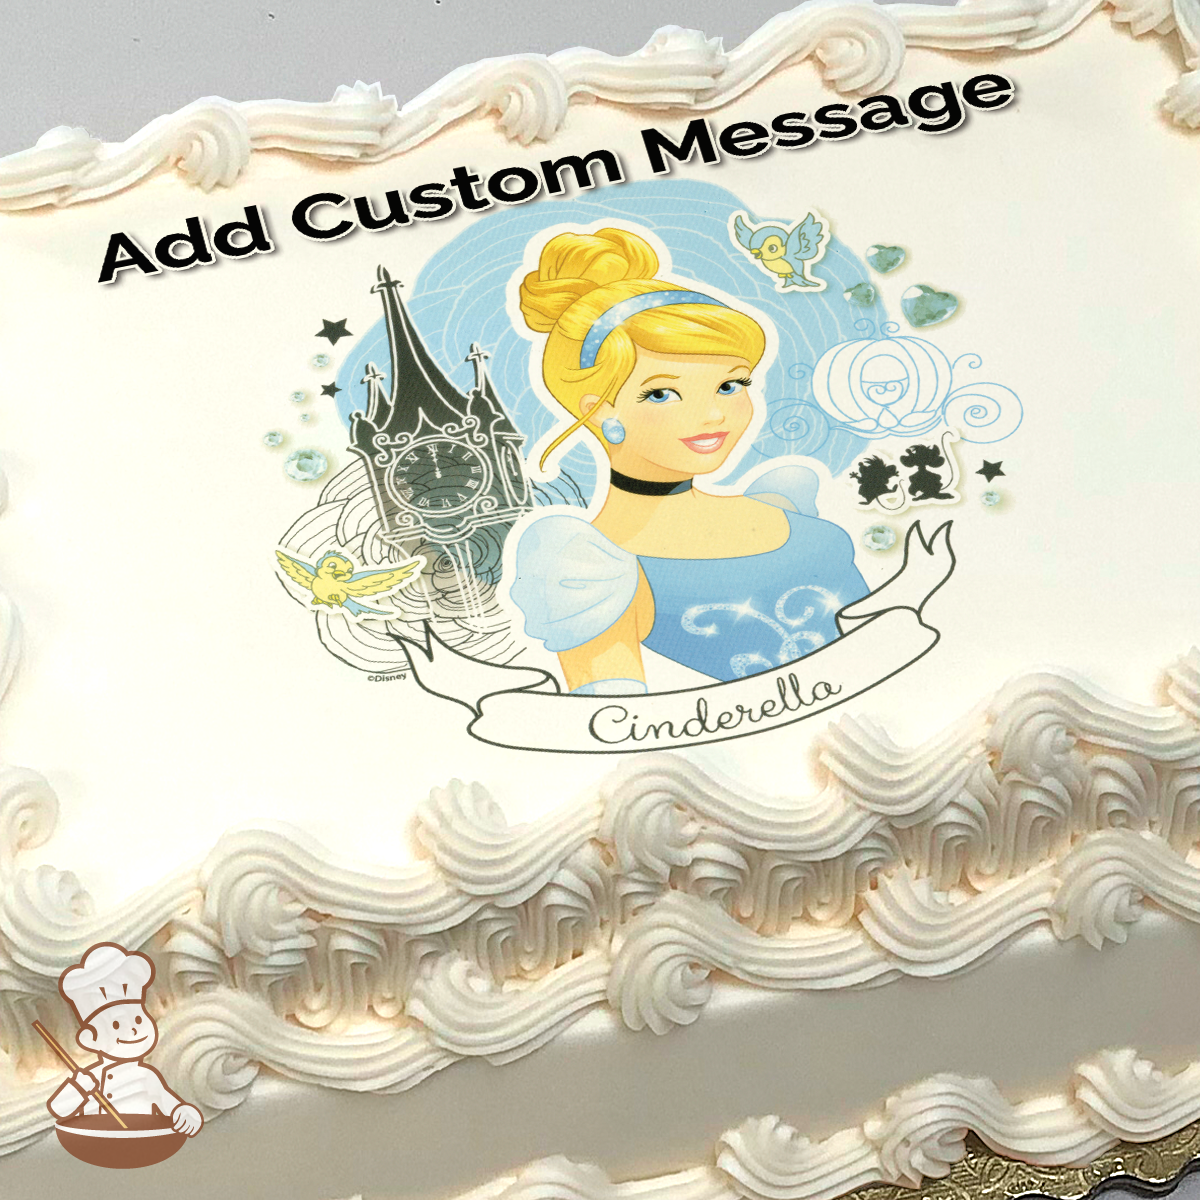 35 Fairytale Princess Cake Ideas That Are Just Magical - Pretty Sweet